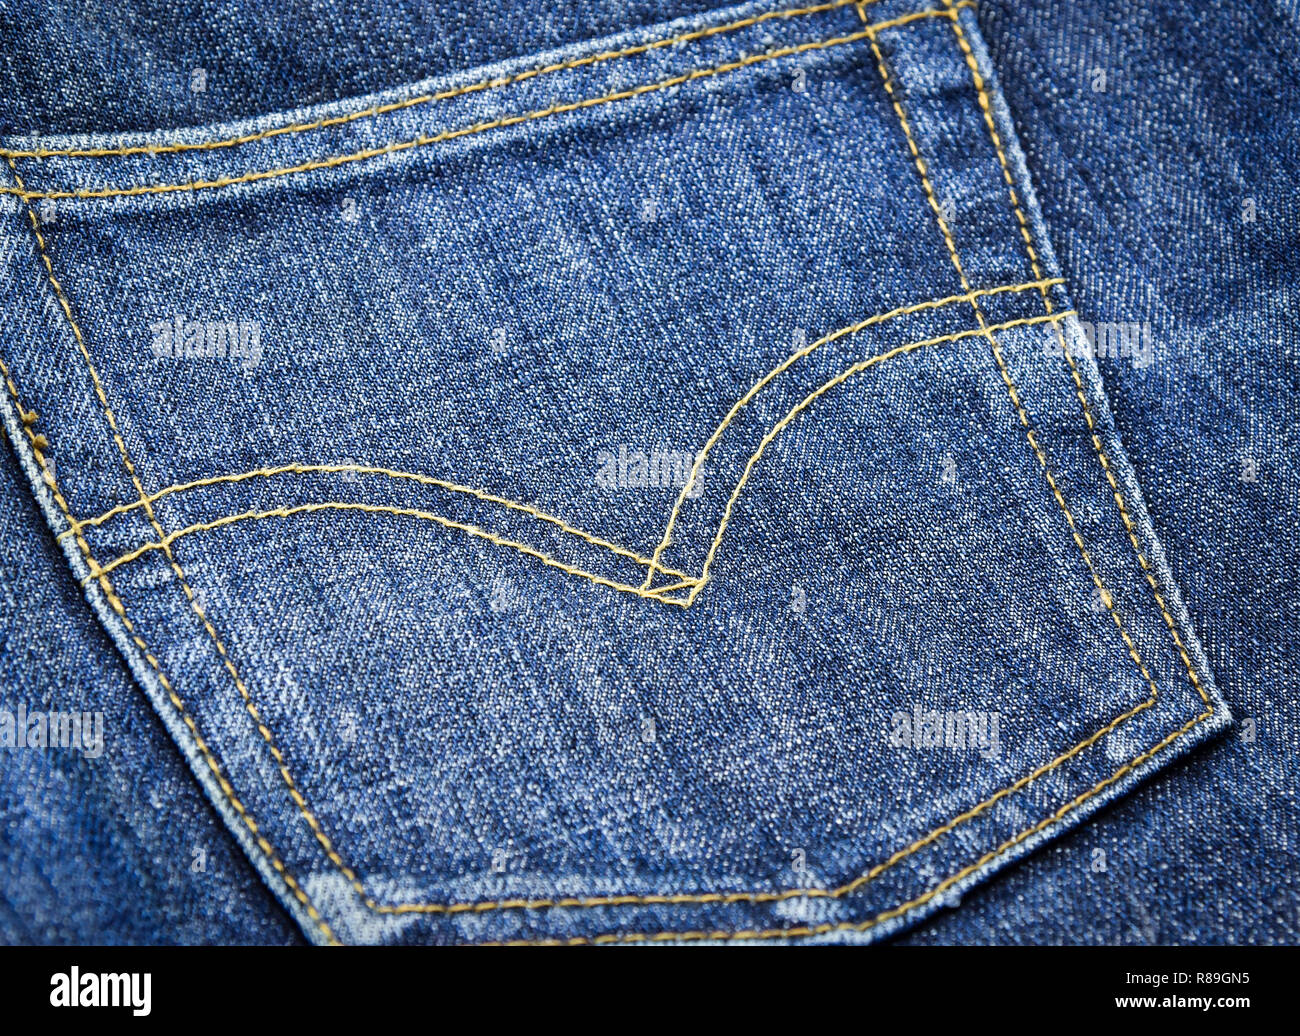 BANGKOK THAILAND - May 11, 2017 LEVI'S jeans texture / close up of old jeans  pocket back side blue jeans levi background Stock Photo - Alamy